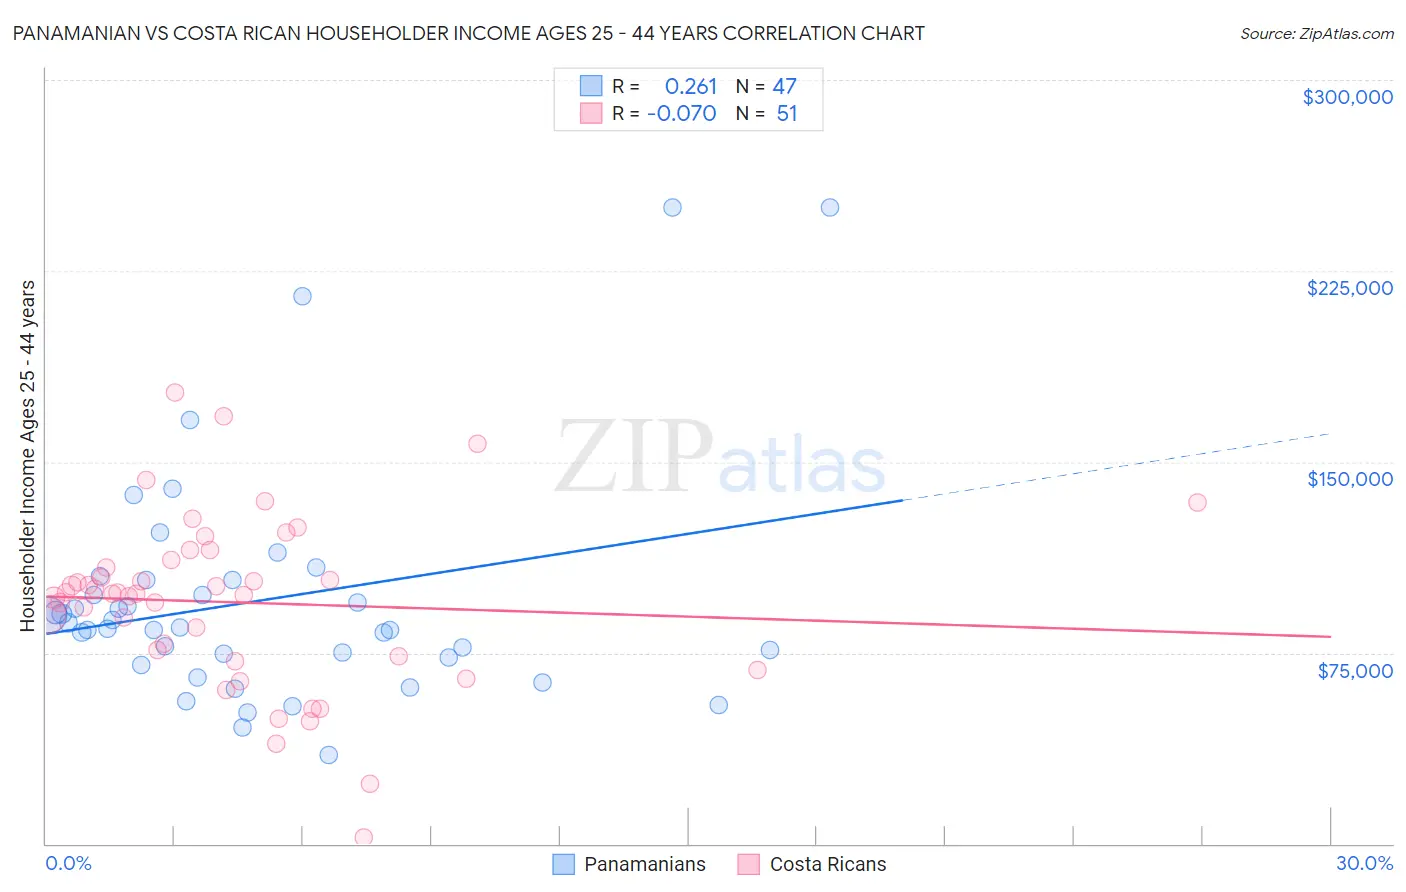 Panamanian vs Costa Rican Householder Income Ages 25 - 44 years